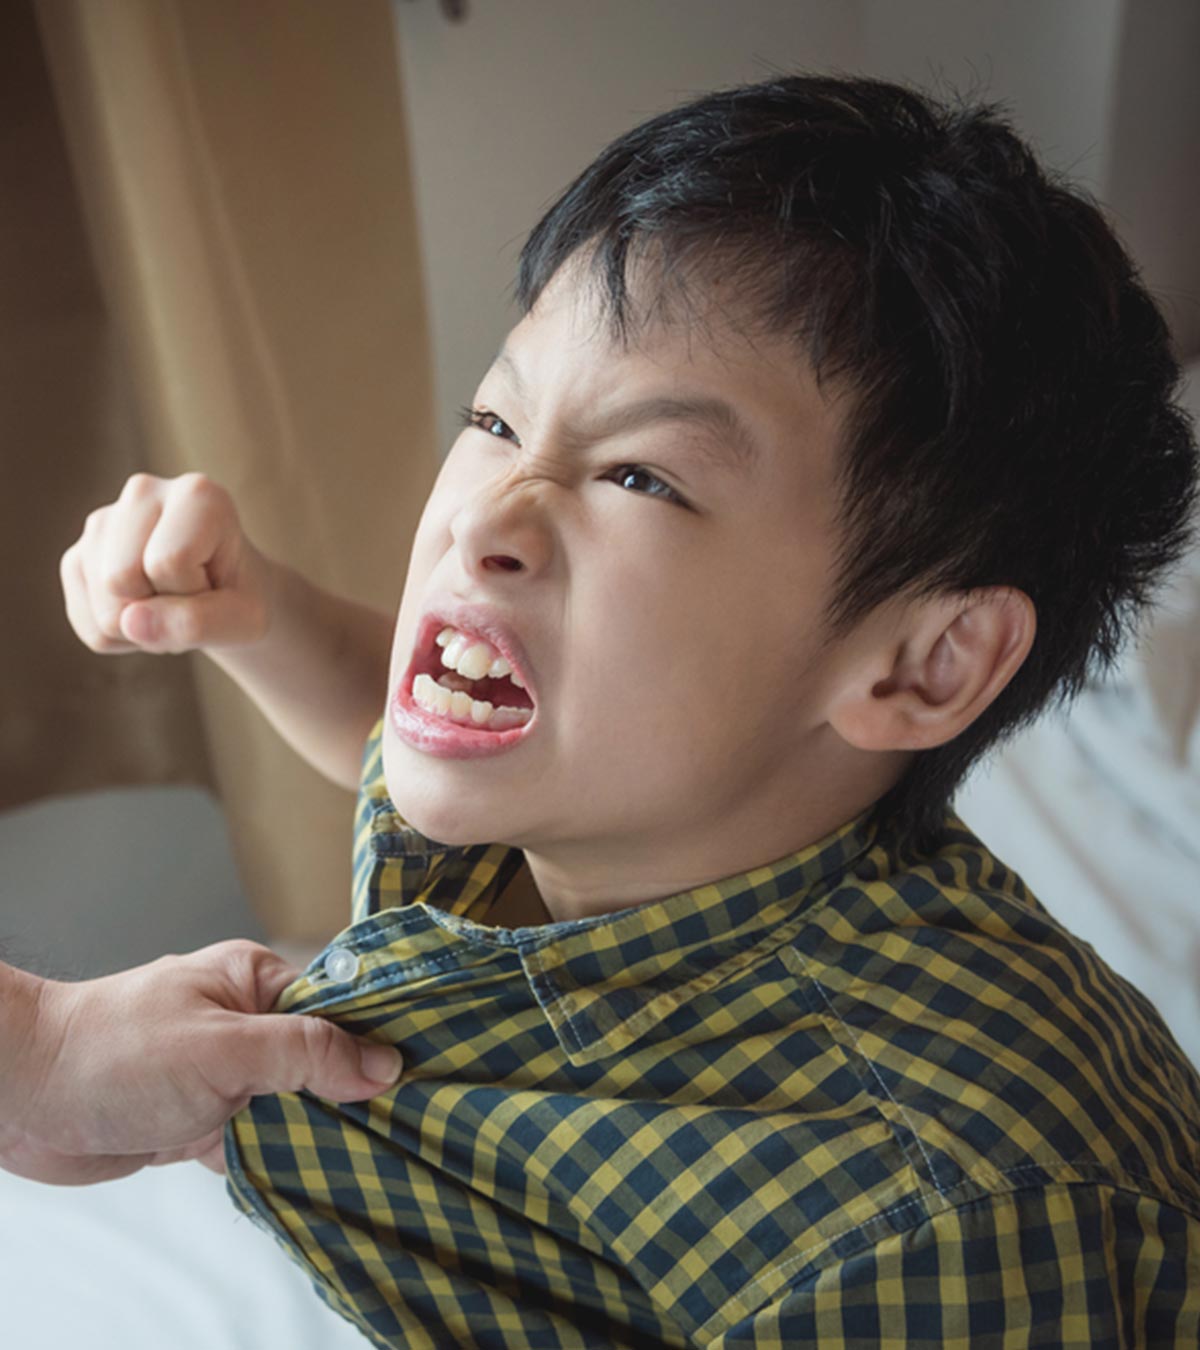 5 C侵略的原因hildren & Tips To Deal With Them